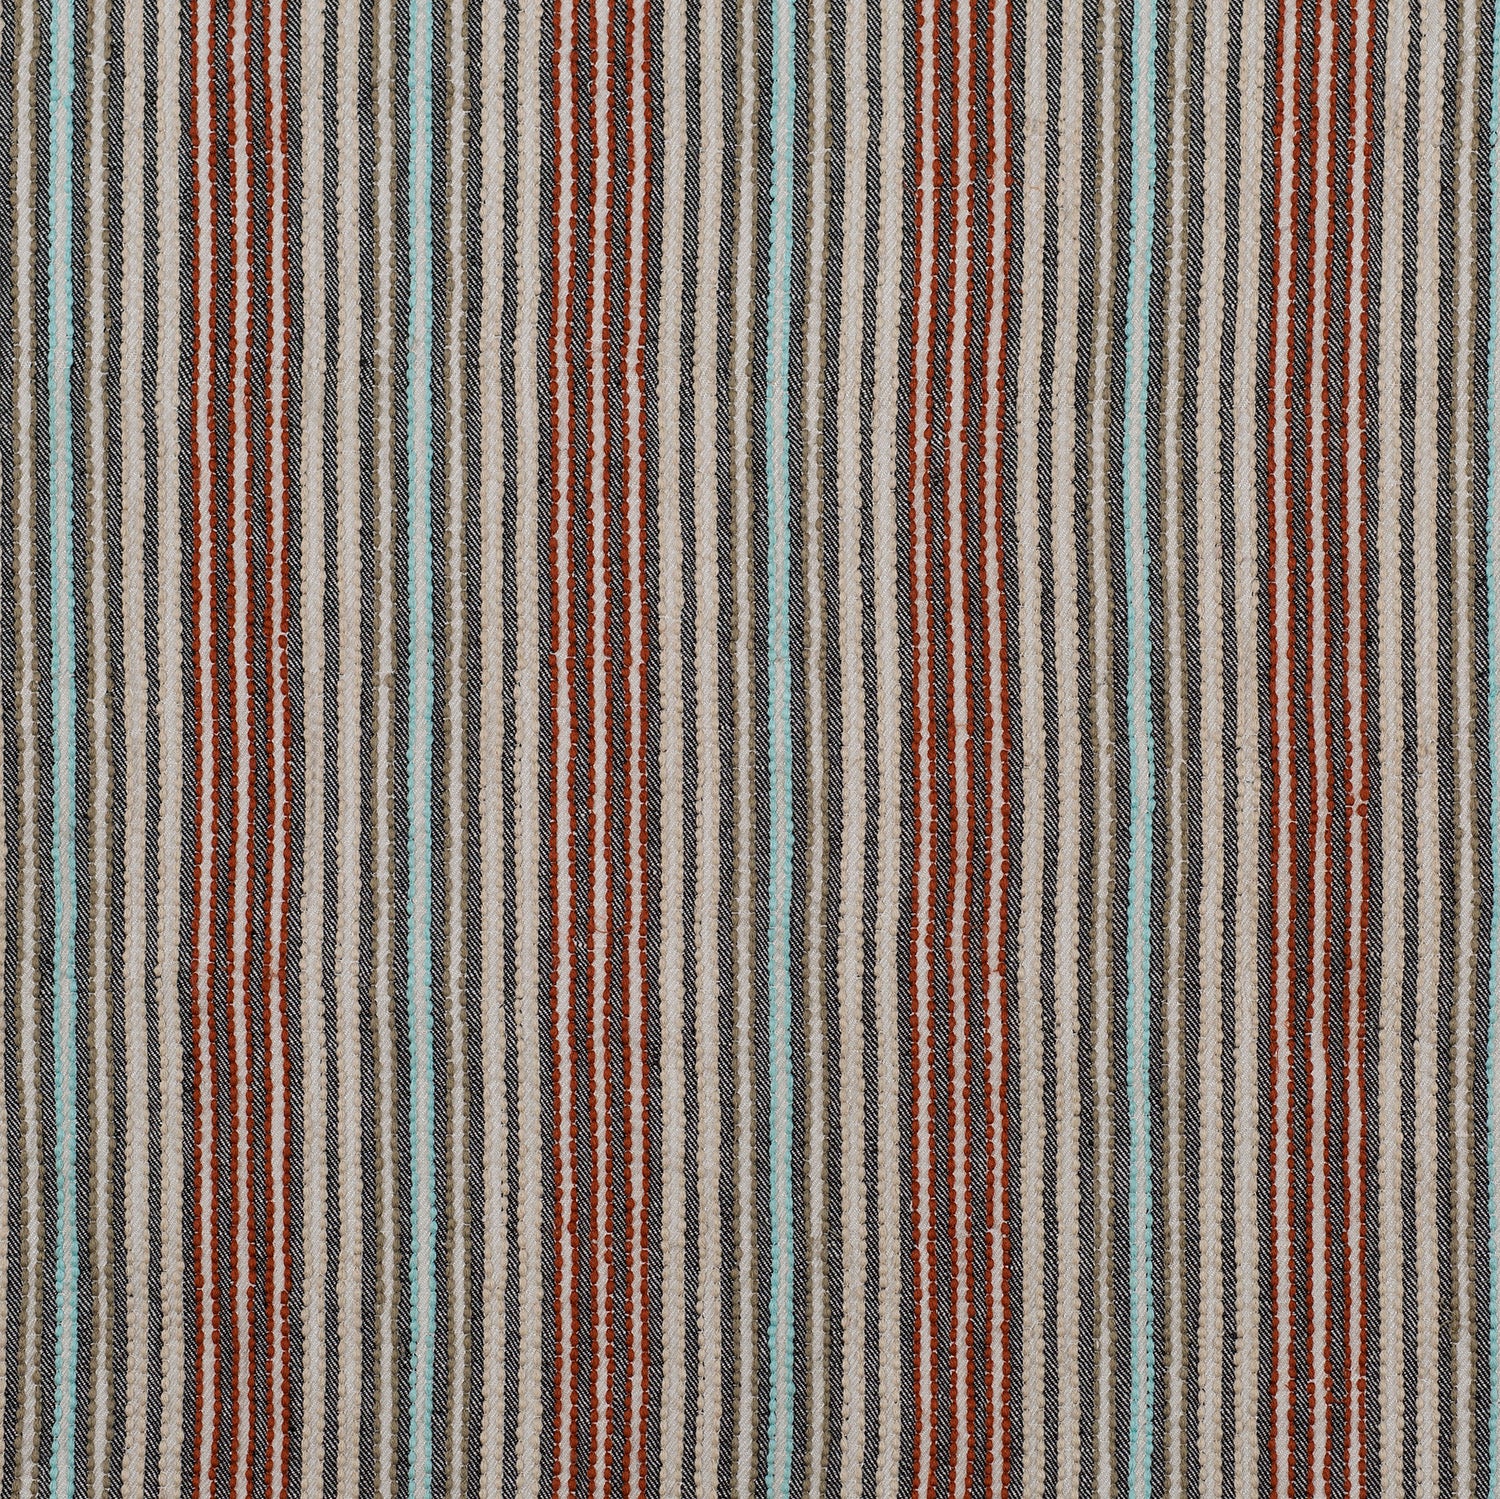 Dimensional embroidered fabric in an irregular stripe pattern in shades of red, blue and cream.